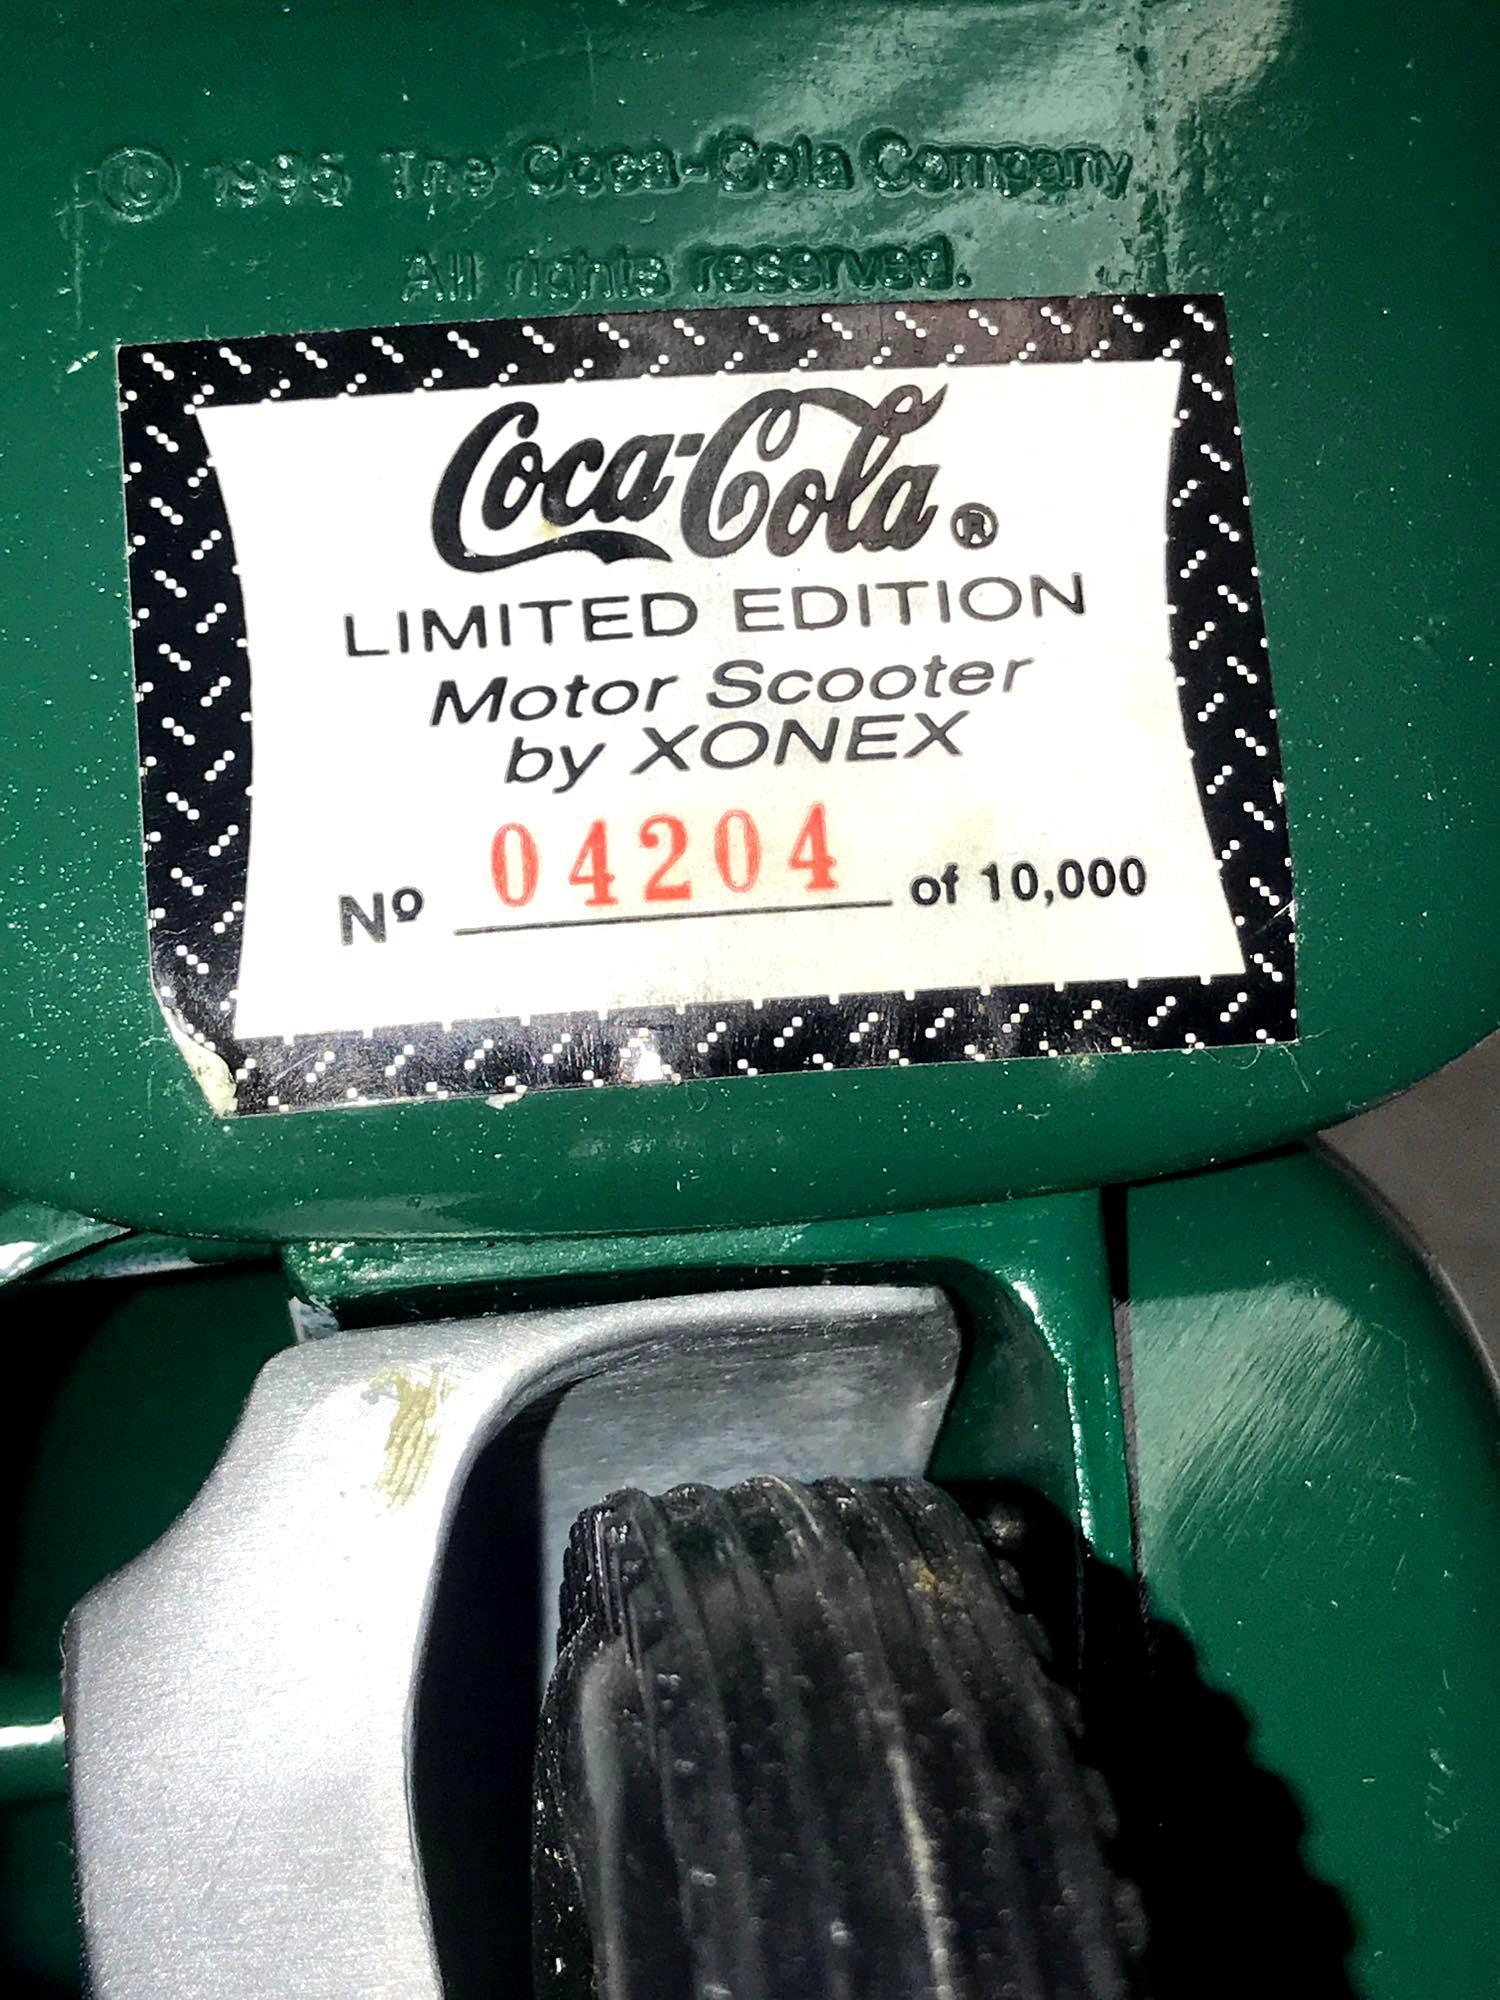 Coca-Cola Miniature Motor Scooter limited edition die cast 1:6 scale